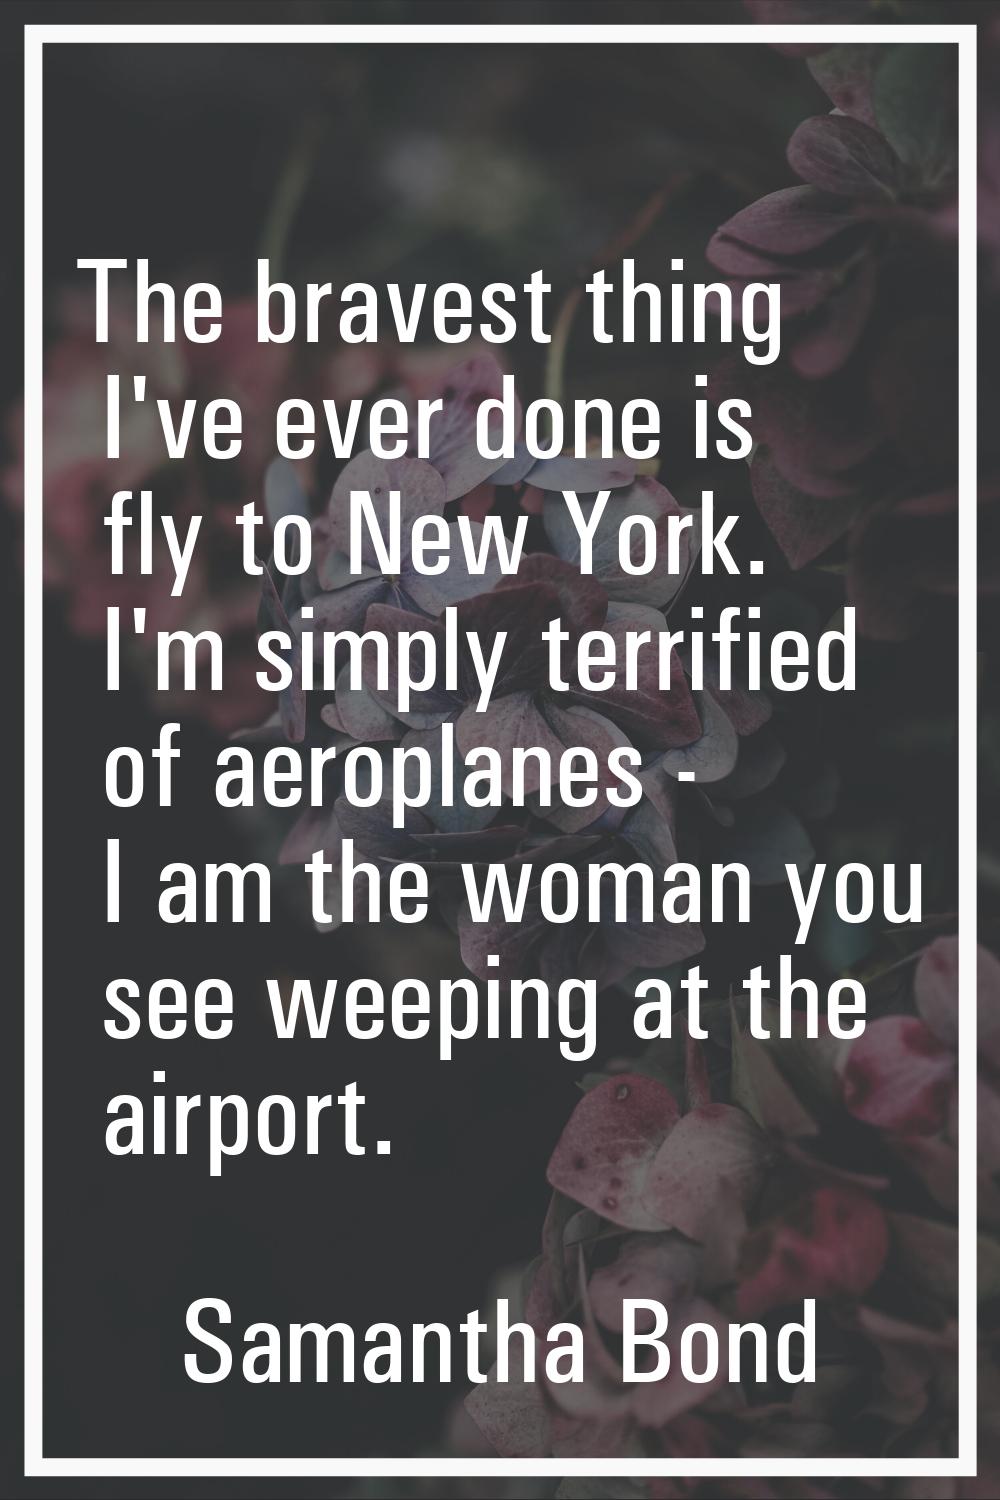 The bravest thing I've ever done is fly to New York. I'm simply terrified of aeroplanes - I am the 